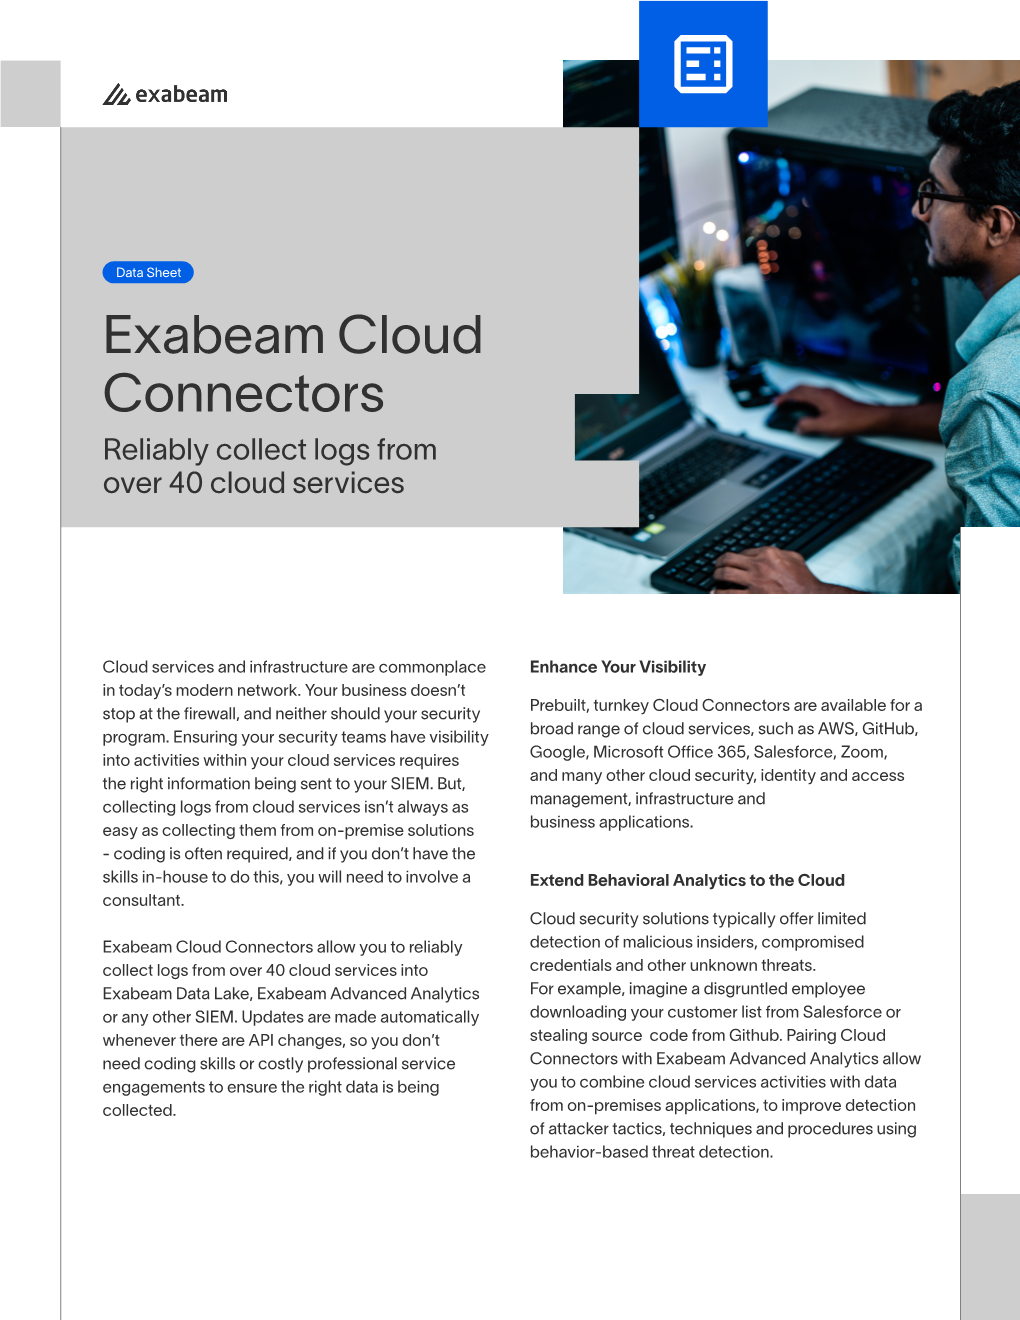 Exabeam Cloud Connectors Reliably Collect Logs from Over 40 Cloud Services